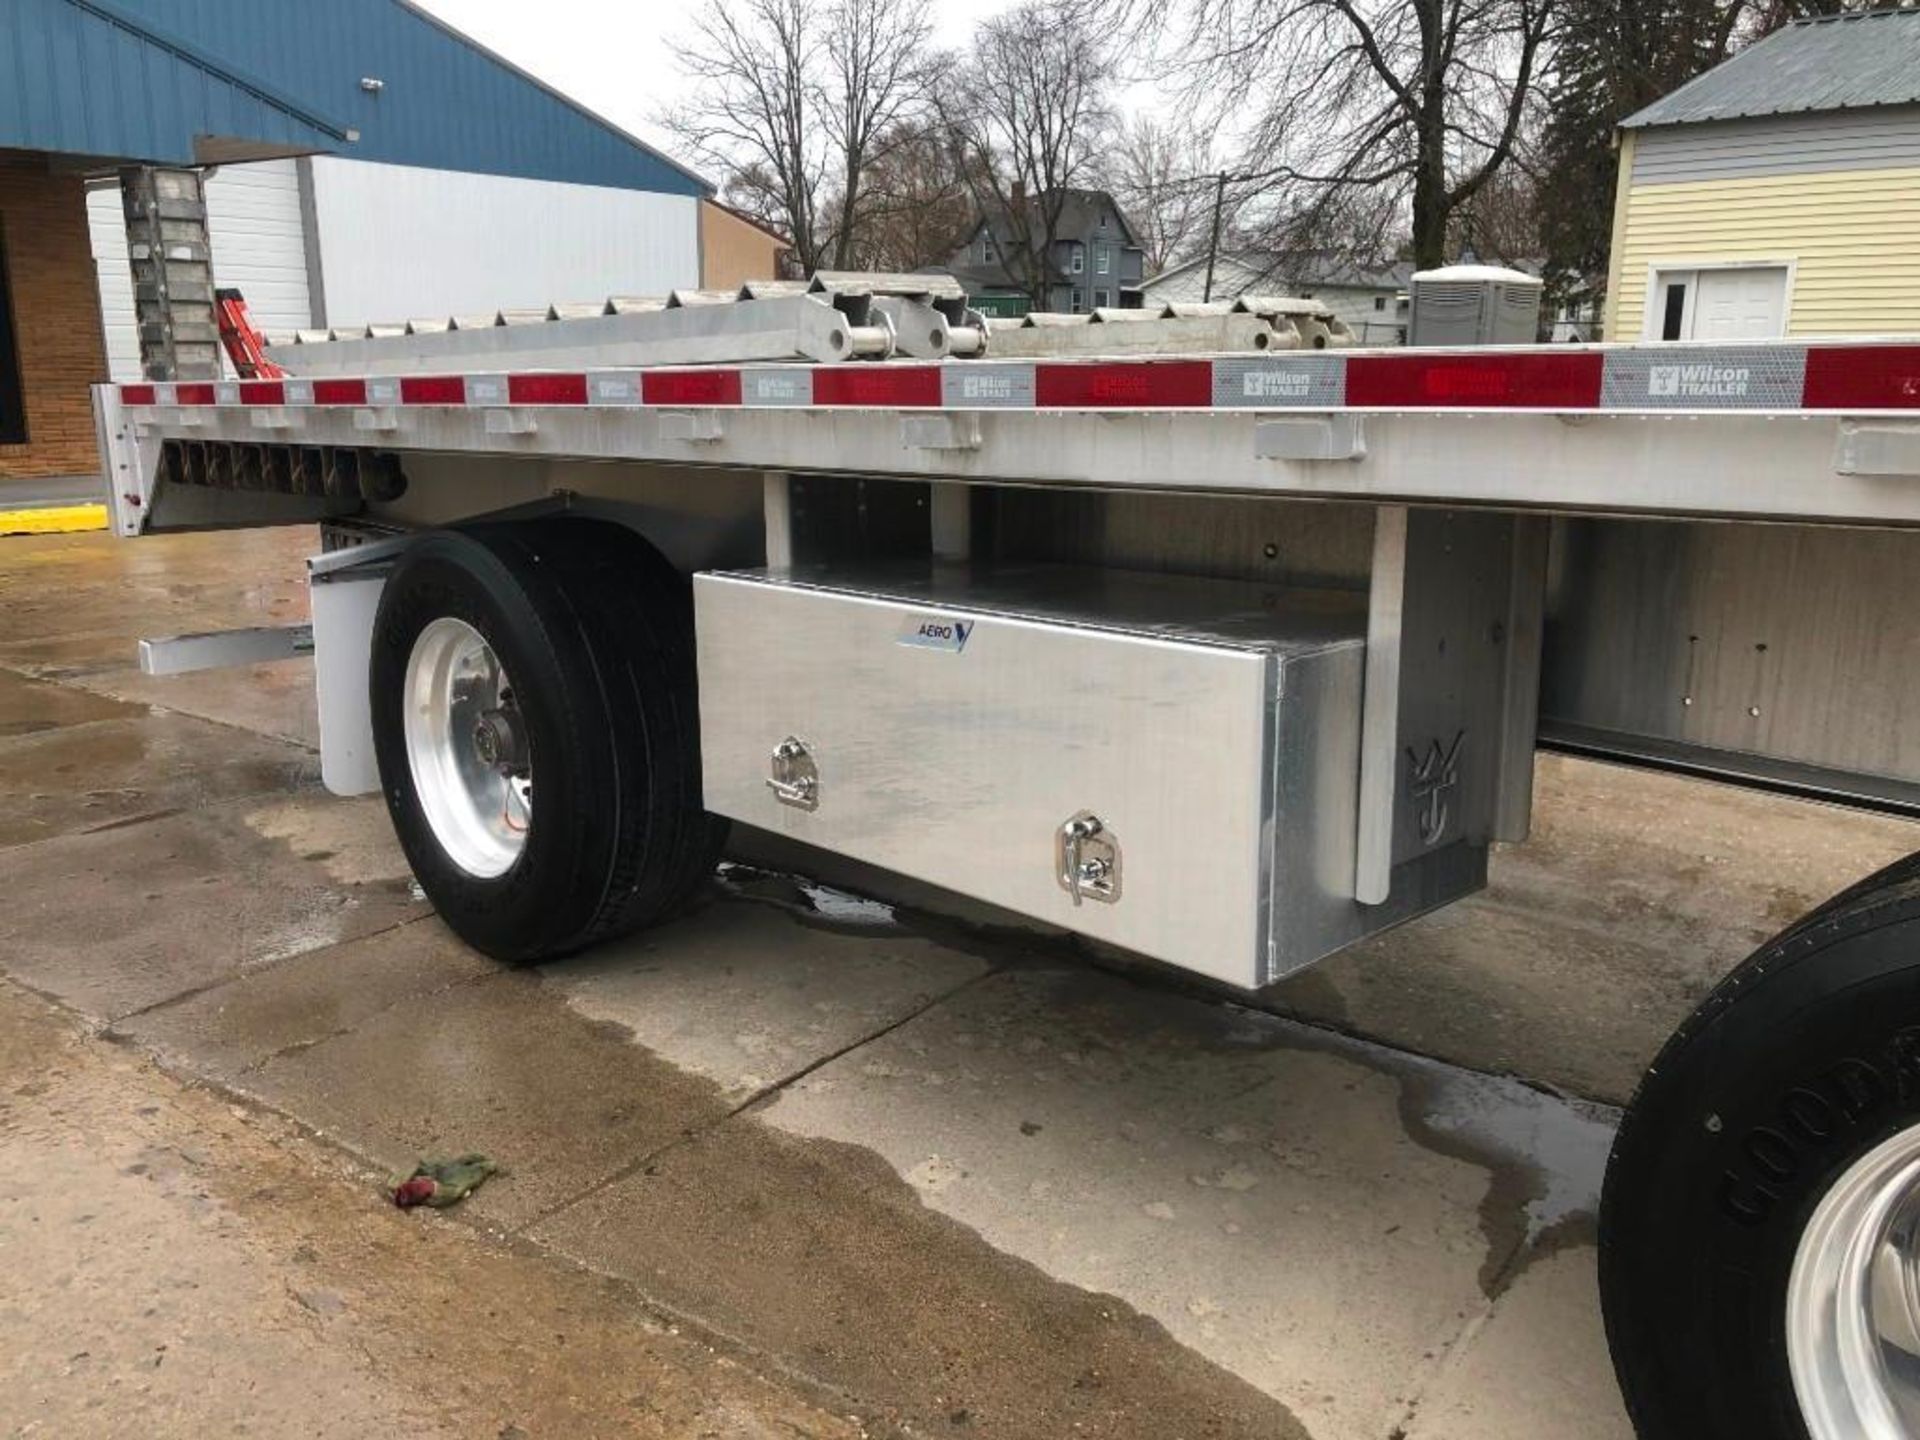 (1) 2018 WILSON Flatbed 53' X 102" Bed, Model AF-1080 SS, VIN #4WW5532A4J6625996 with Ramps, - Image 26 of 29